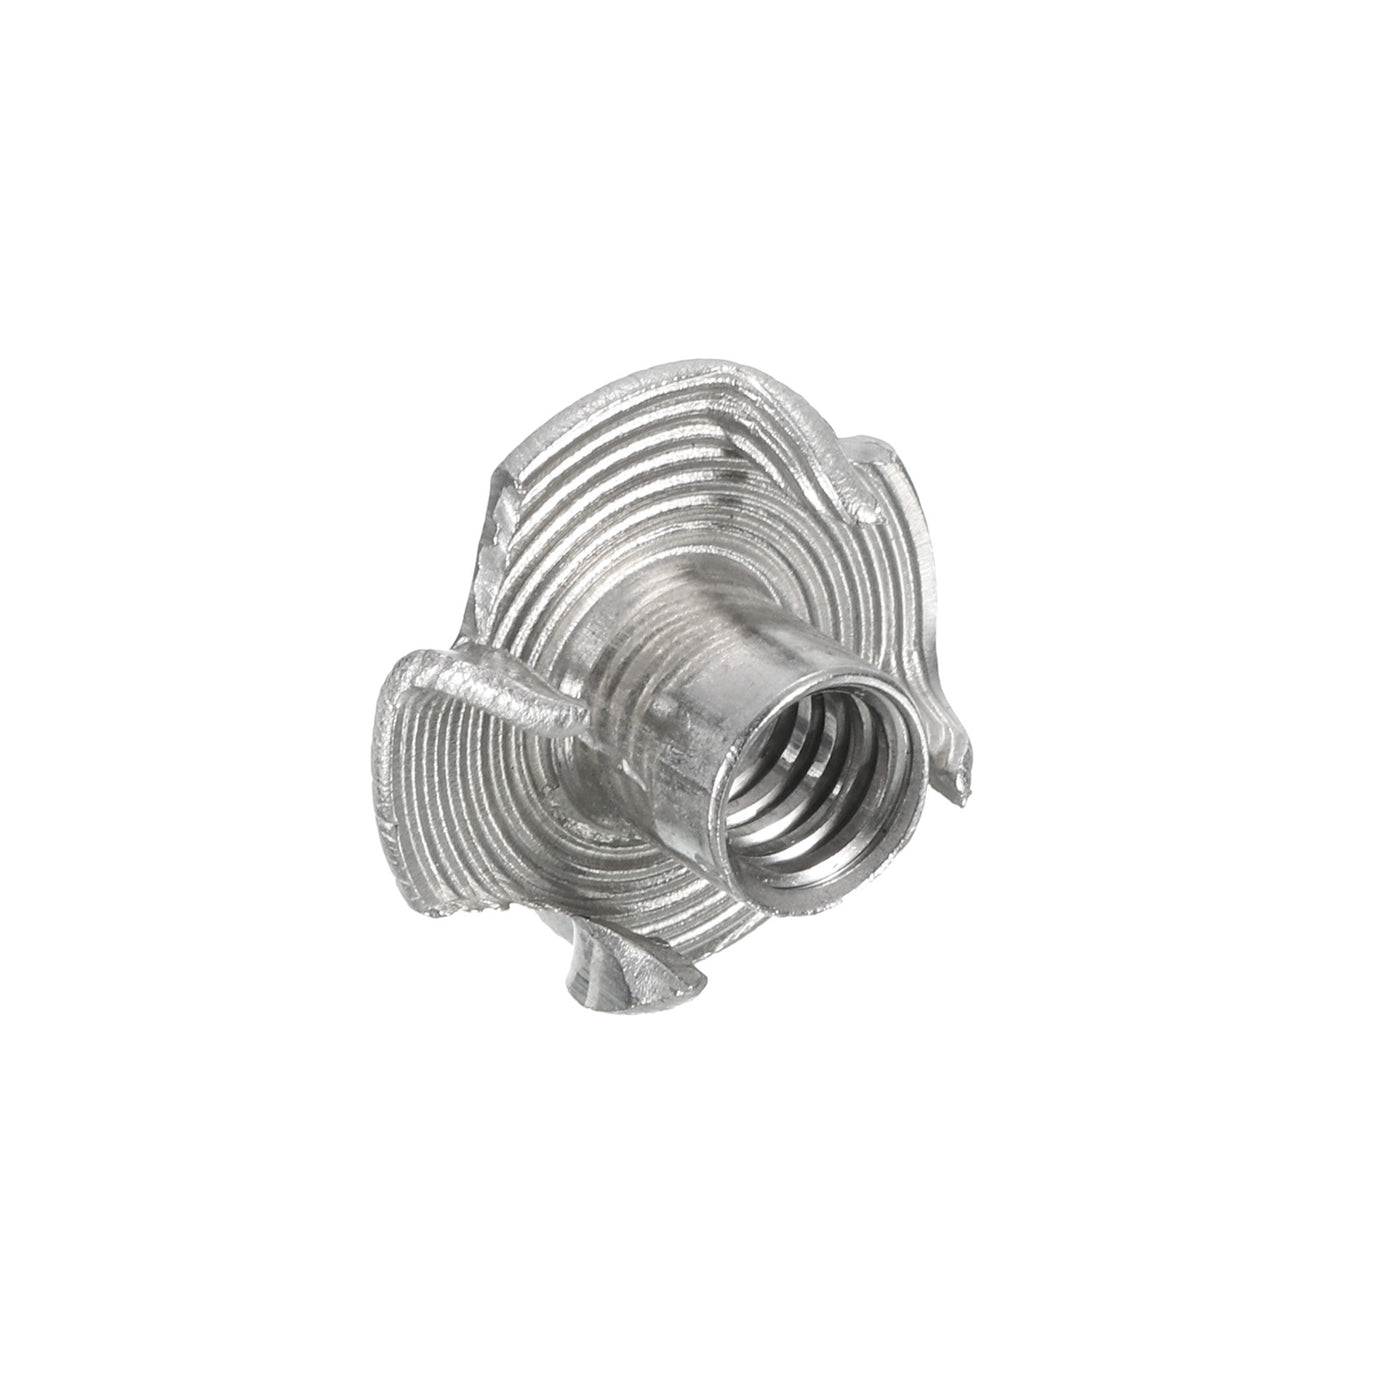 uxcell Uxcell 1/4"-20 T-nut 25pcs 304 Stainless Steel 4 Pronged Tee Nuts Threaded Insertion